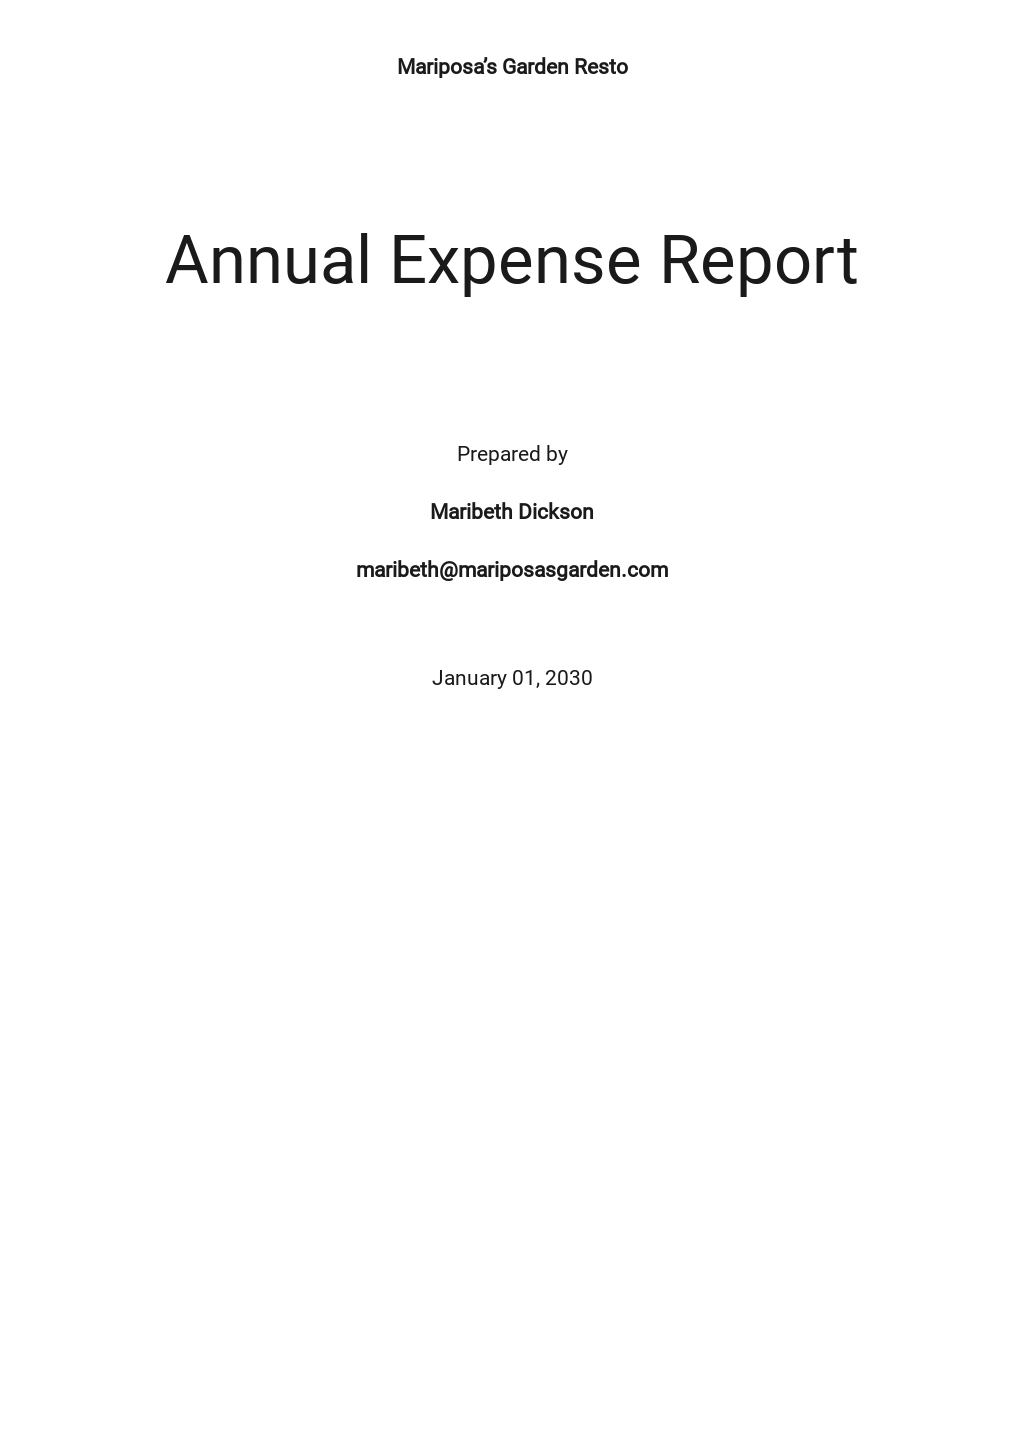 Free Annual Expense Report Template.jpe